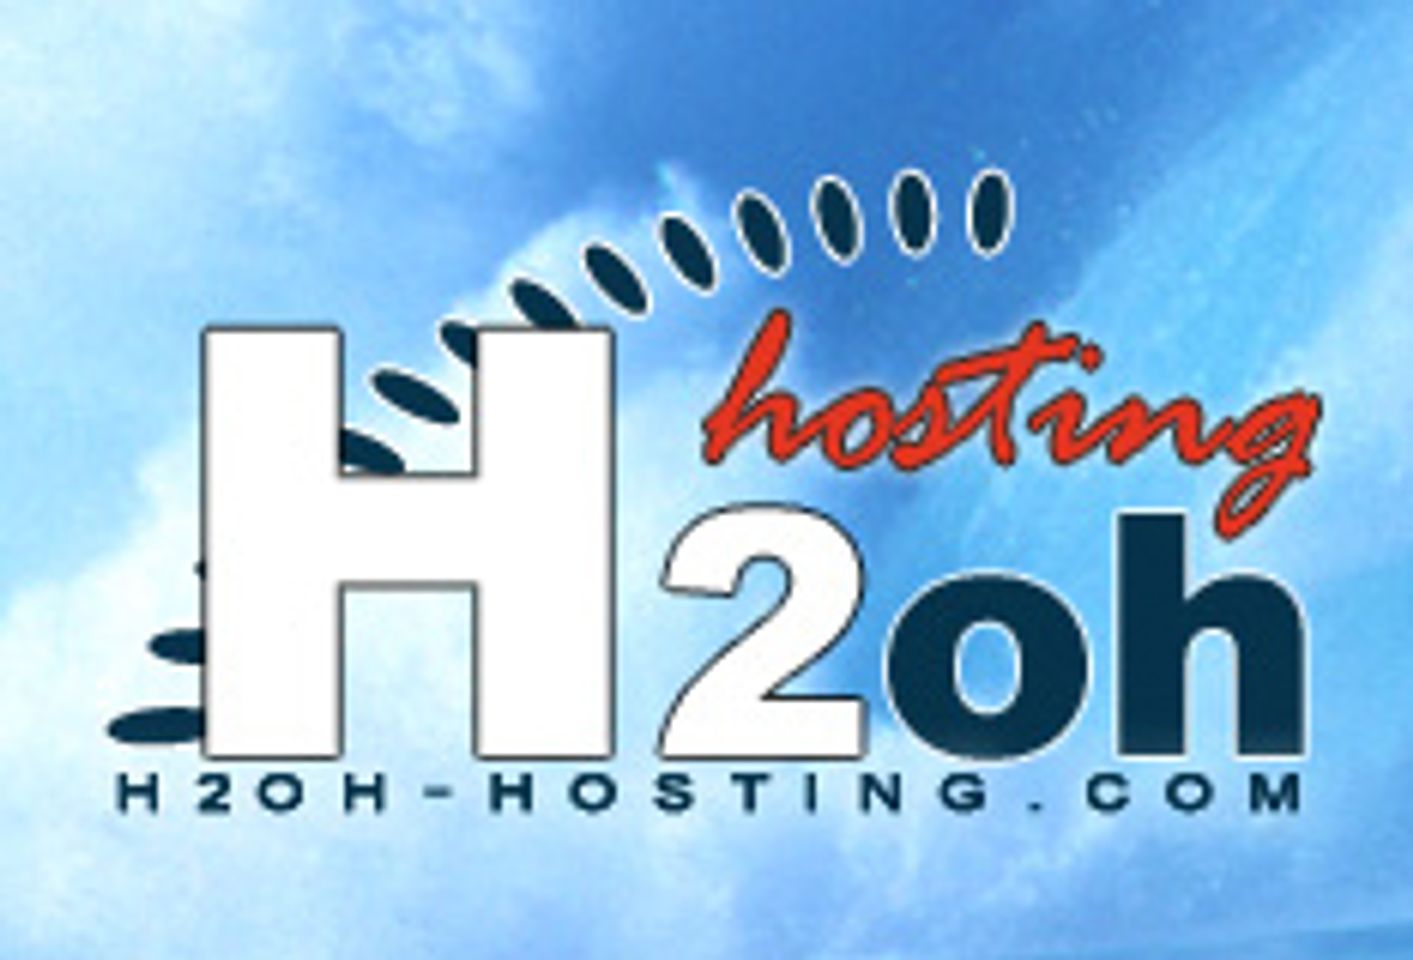 Managed Adult Hosting Site H2oh-hosting.com Launched